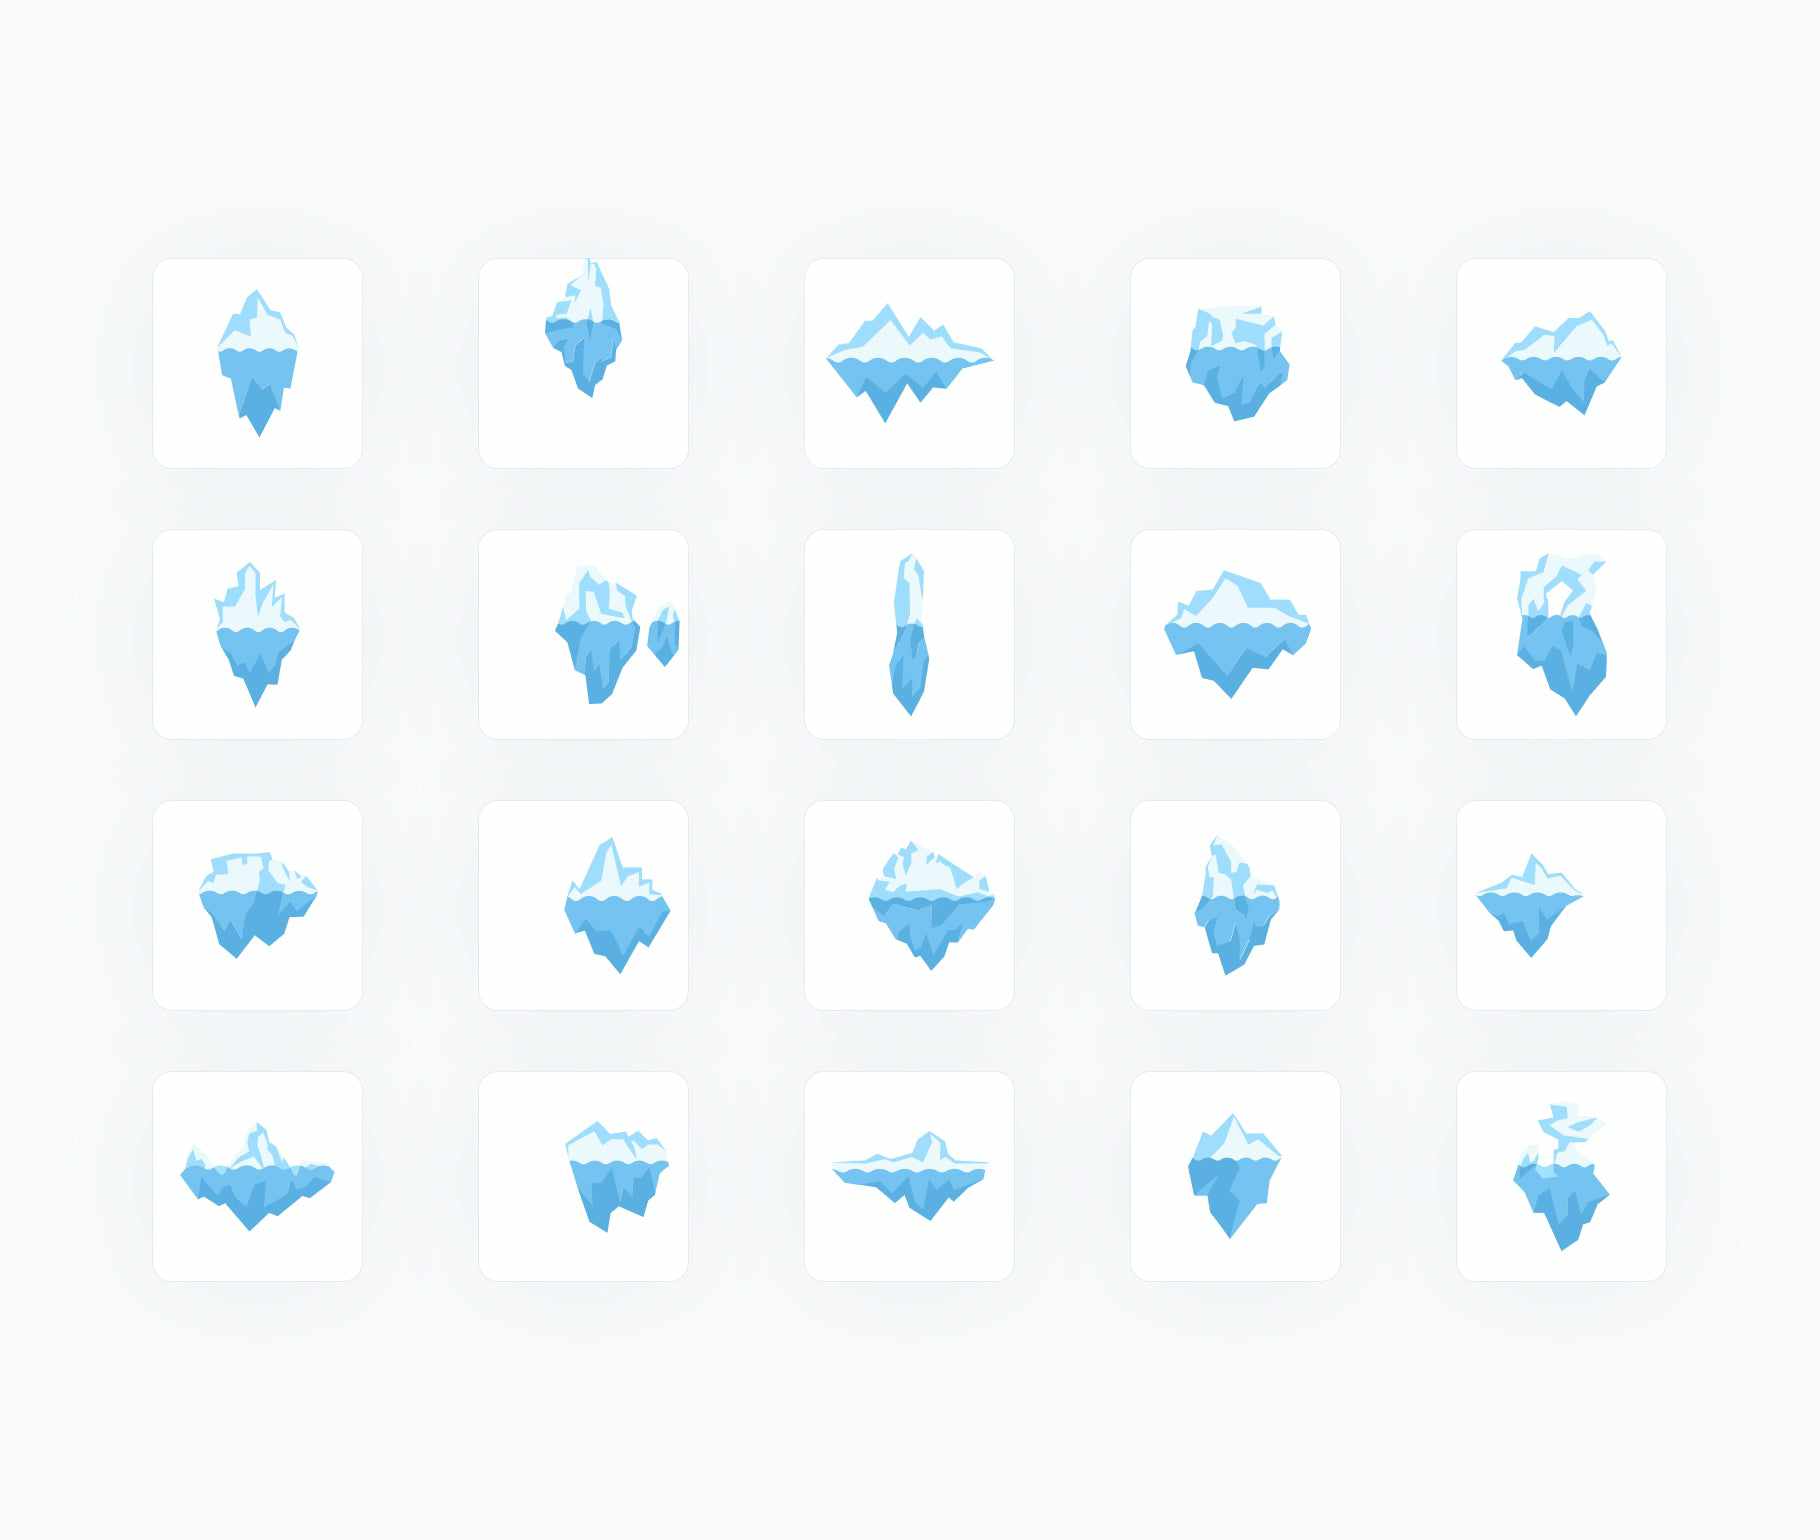 Iceberg-Flat-Vector-Icons Icons Iceberg Flat Vector Icons S12132101 powerpoint-template keynote-template google-slides-template infographic-template